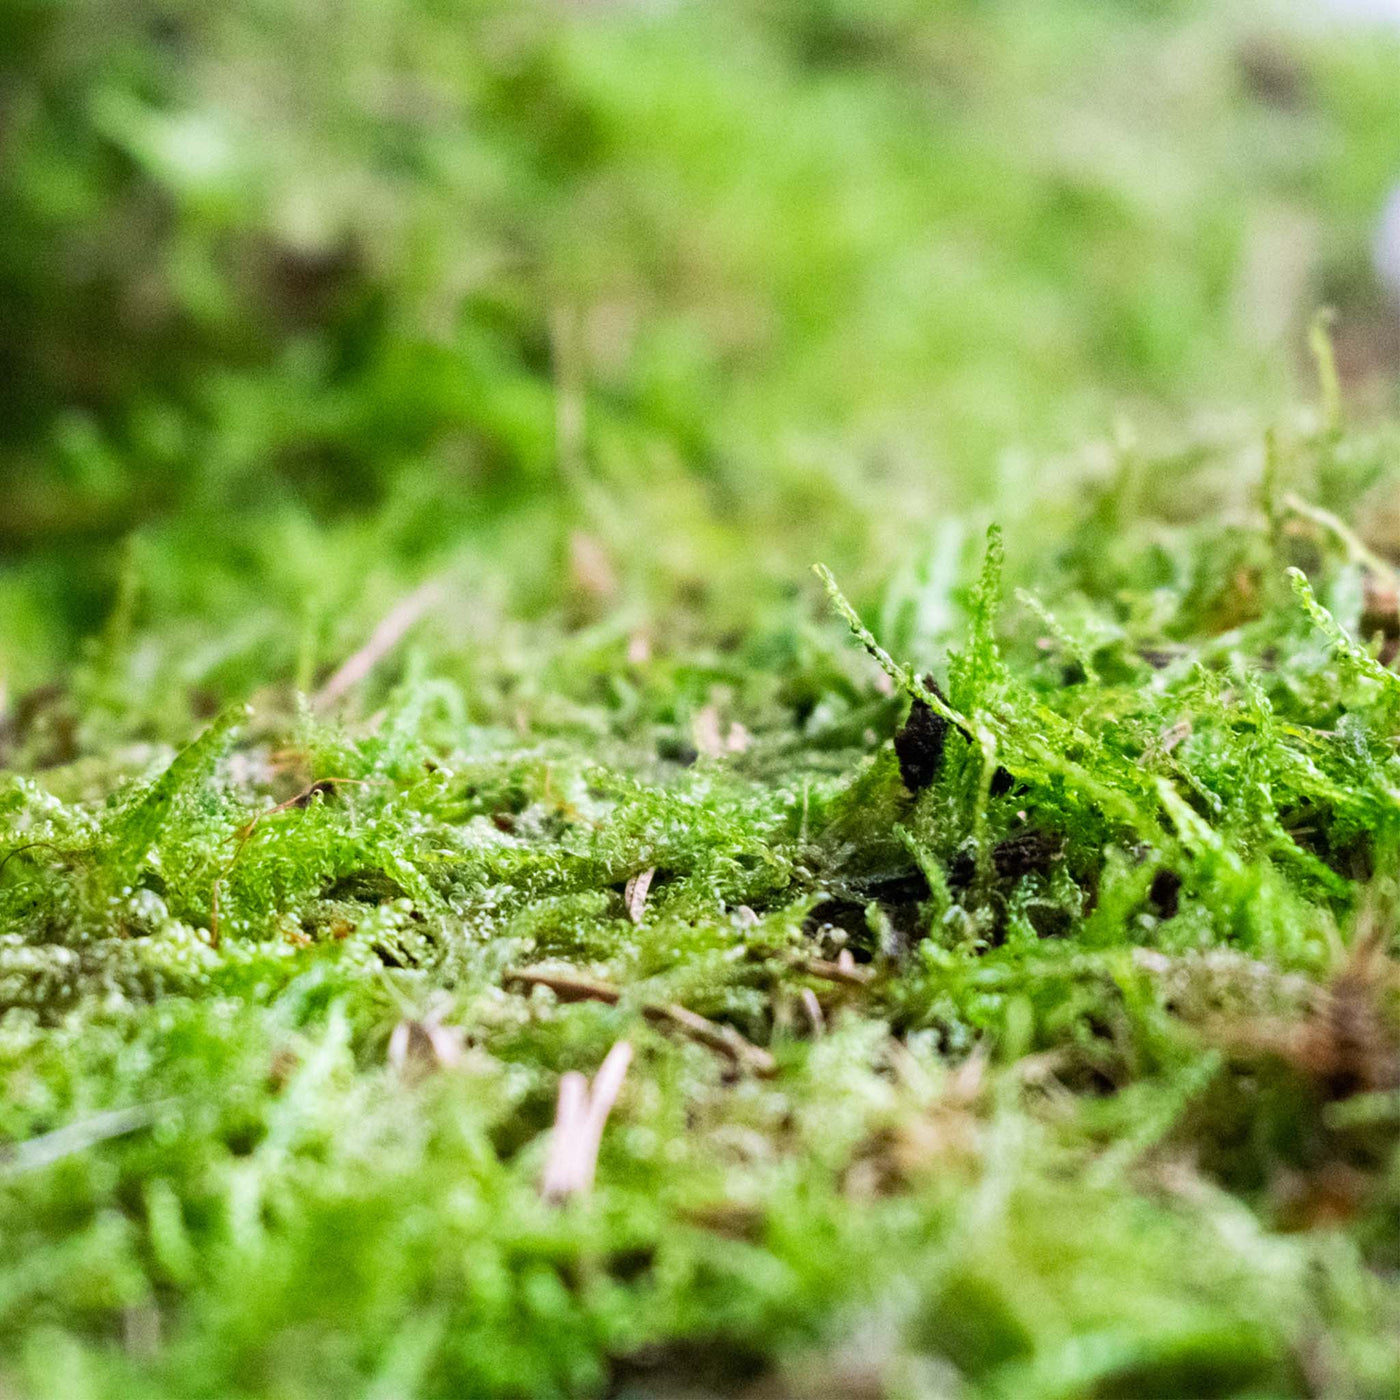 Whole moss carpet Can Make Any Space Beautiful and Vibrant